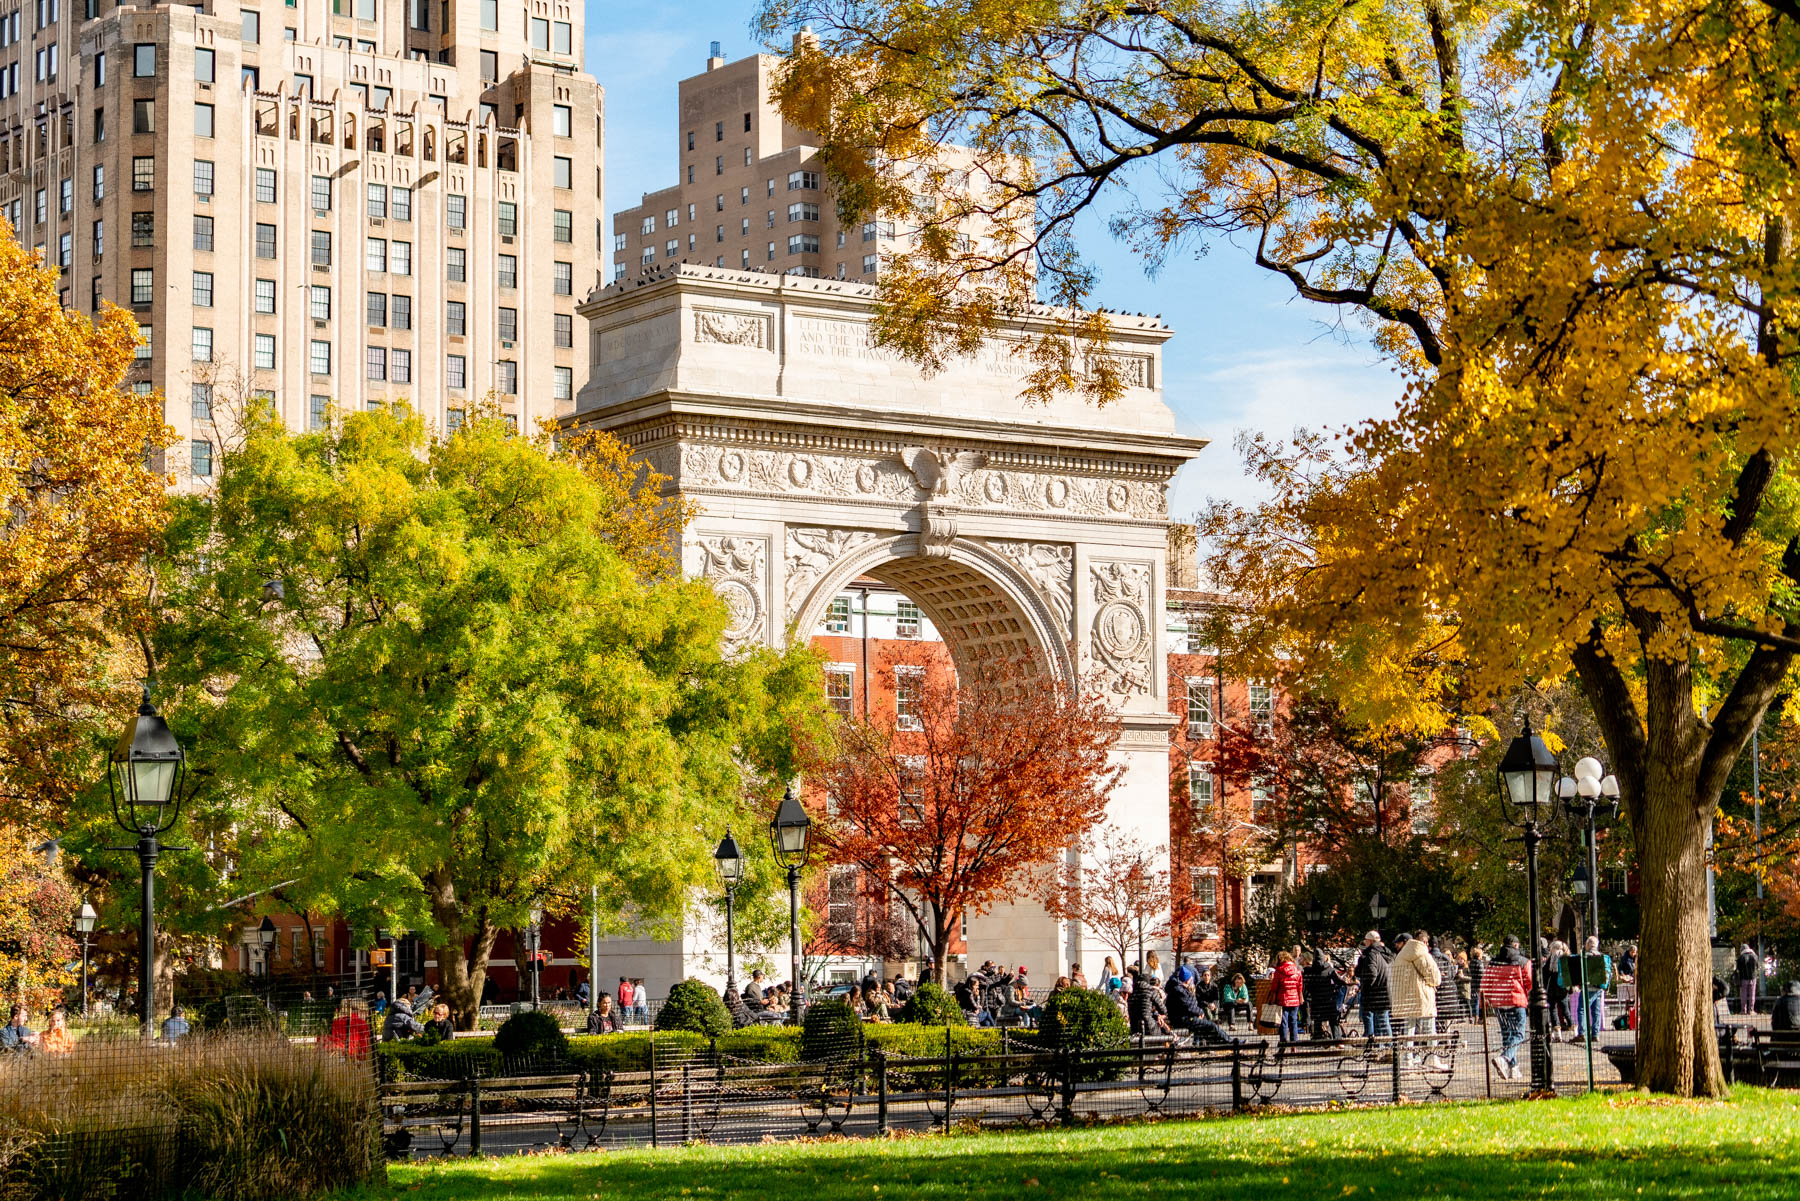 helpful tips for visiting New York City